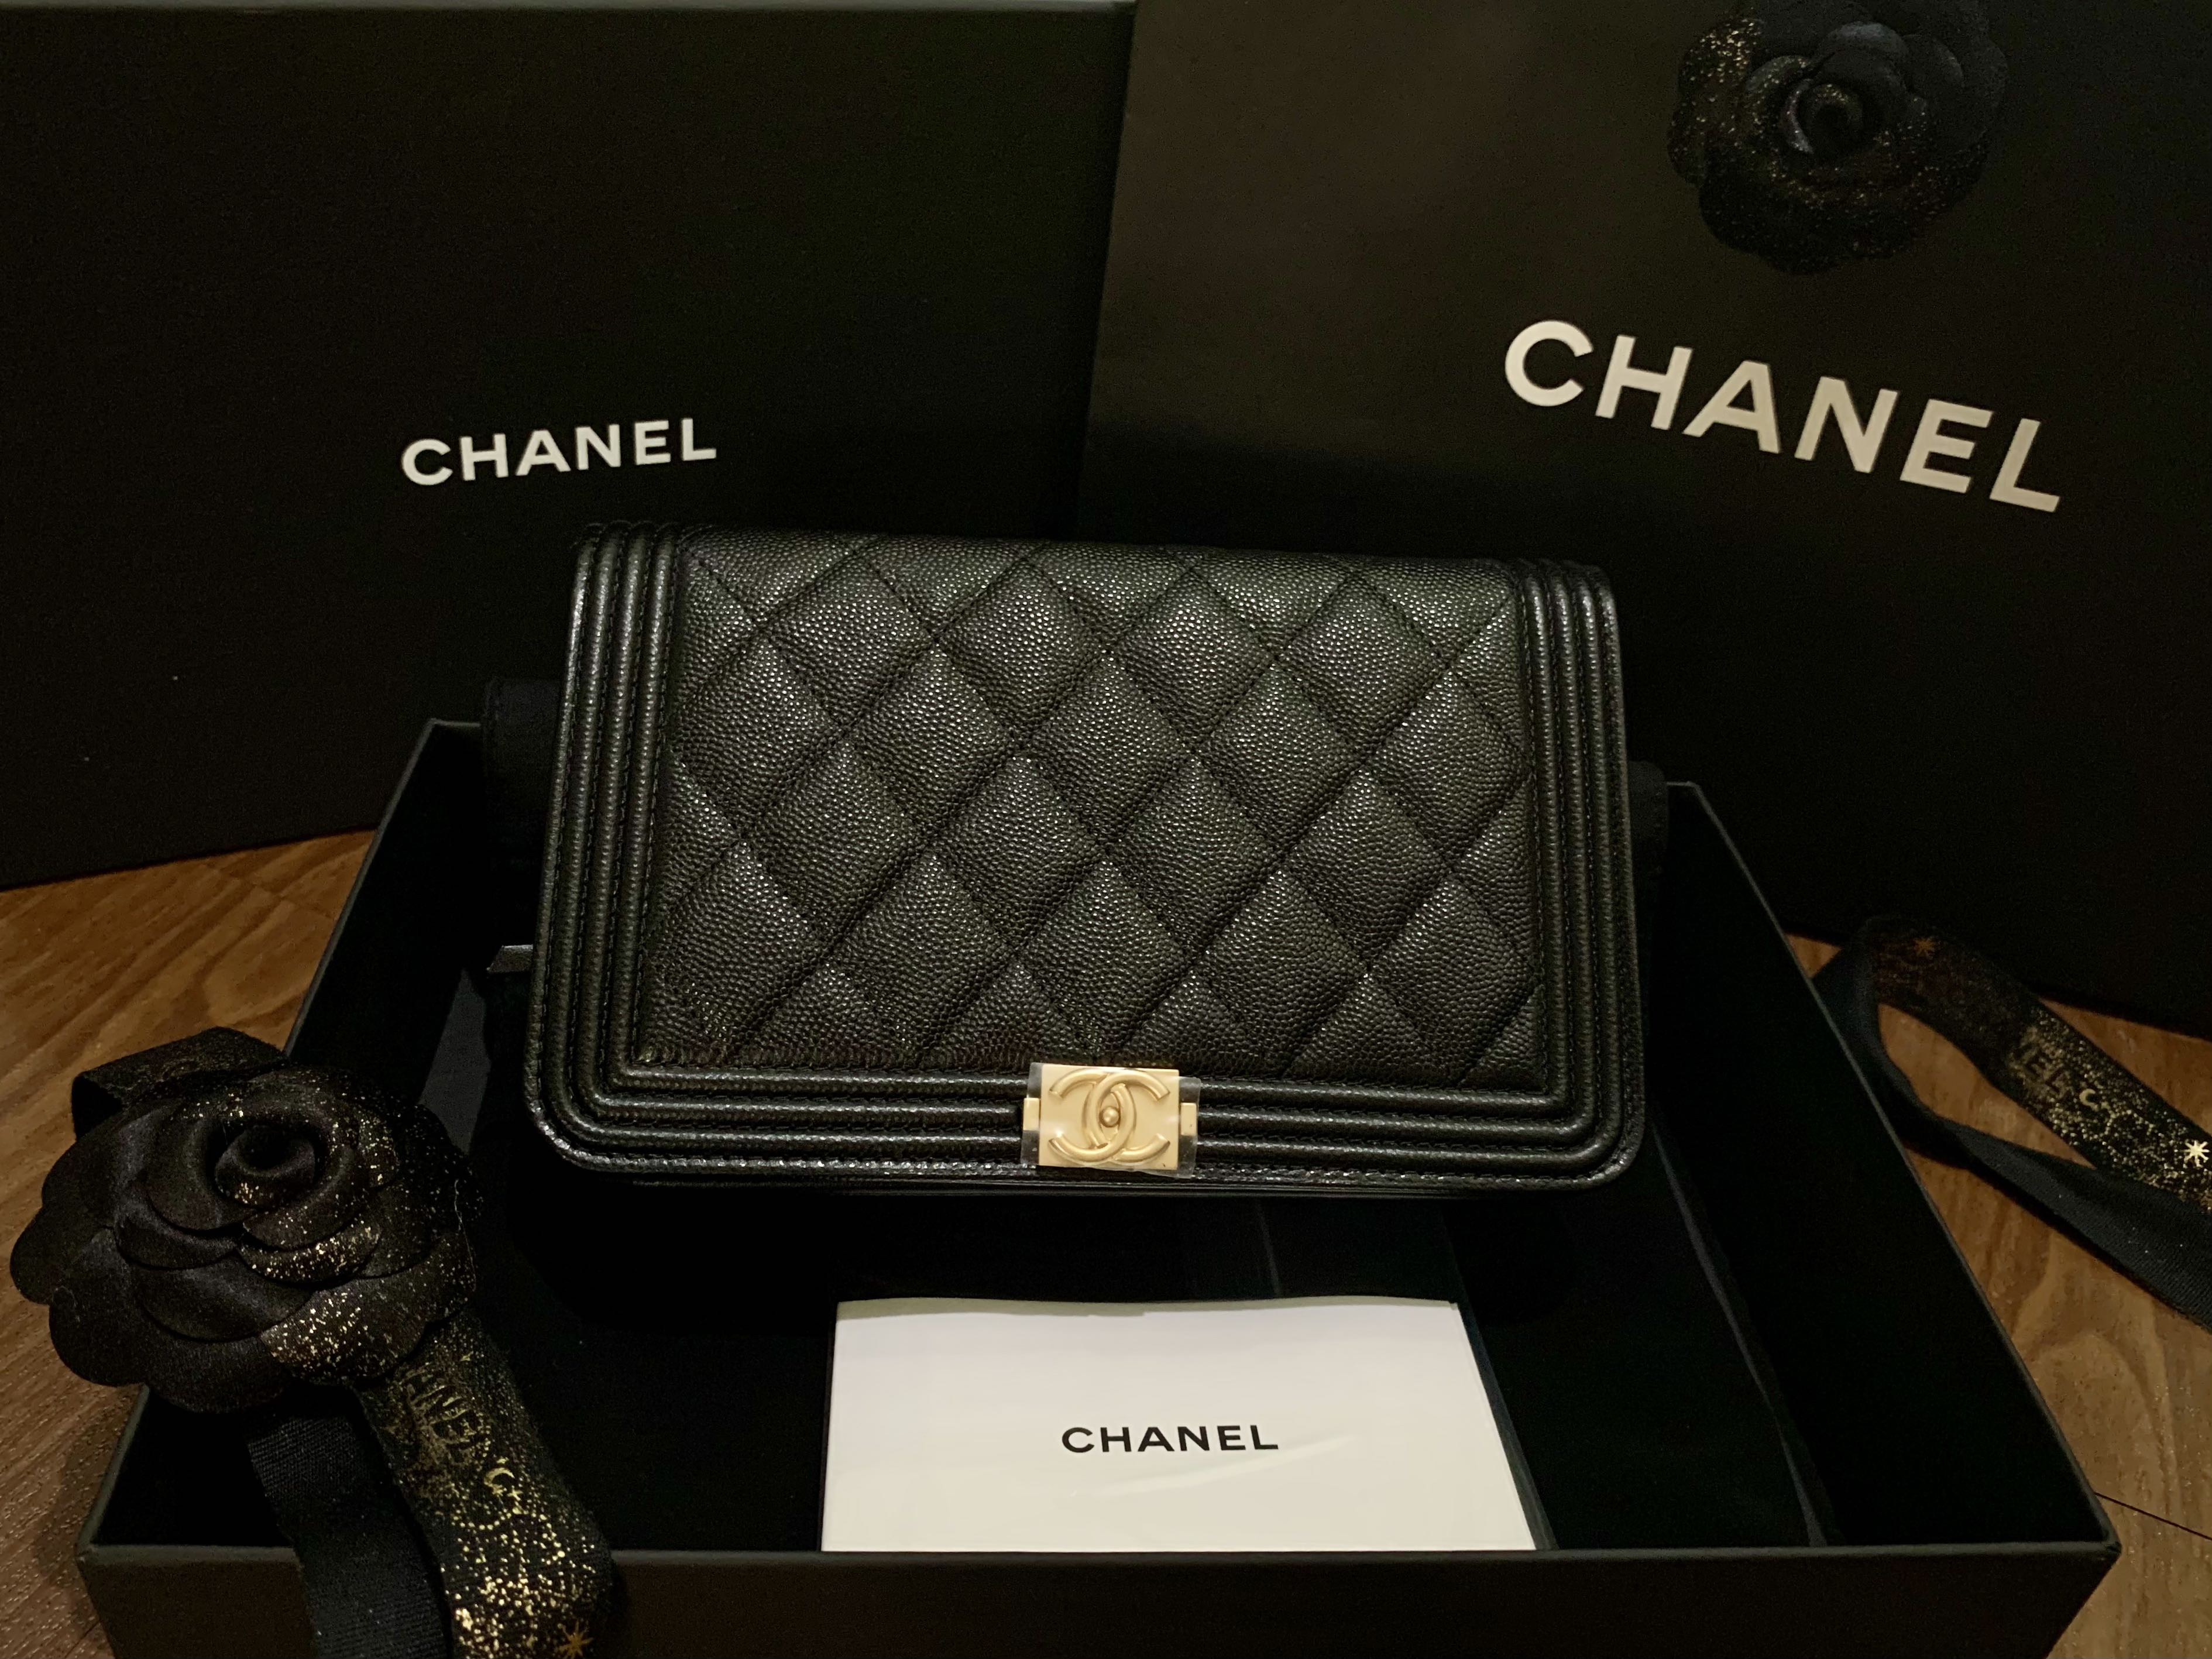 Quotations from second hand bags Morabito autres sacs et maroquinerie, Chanel Shoulder bag 399692